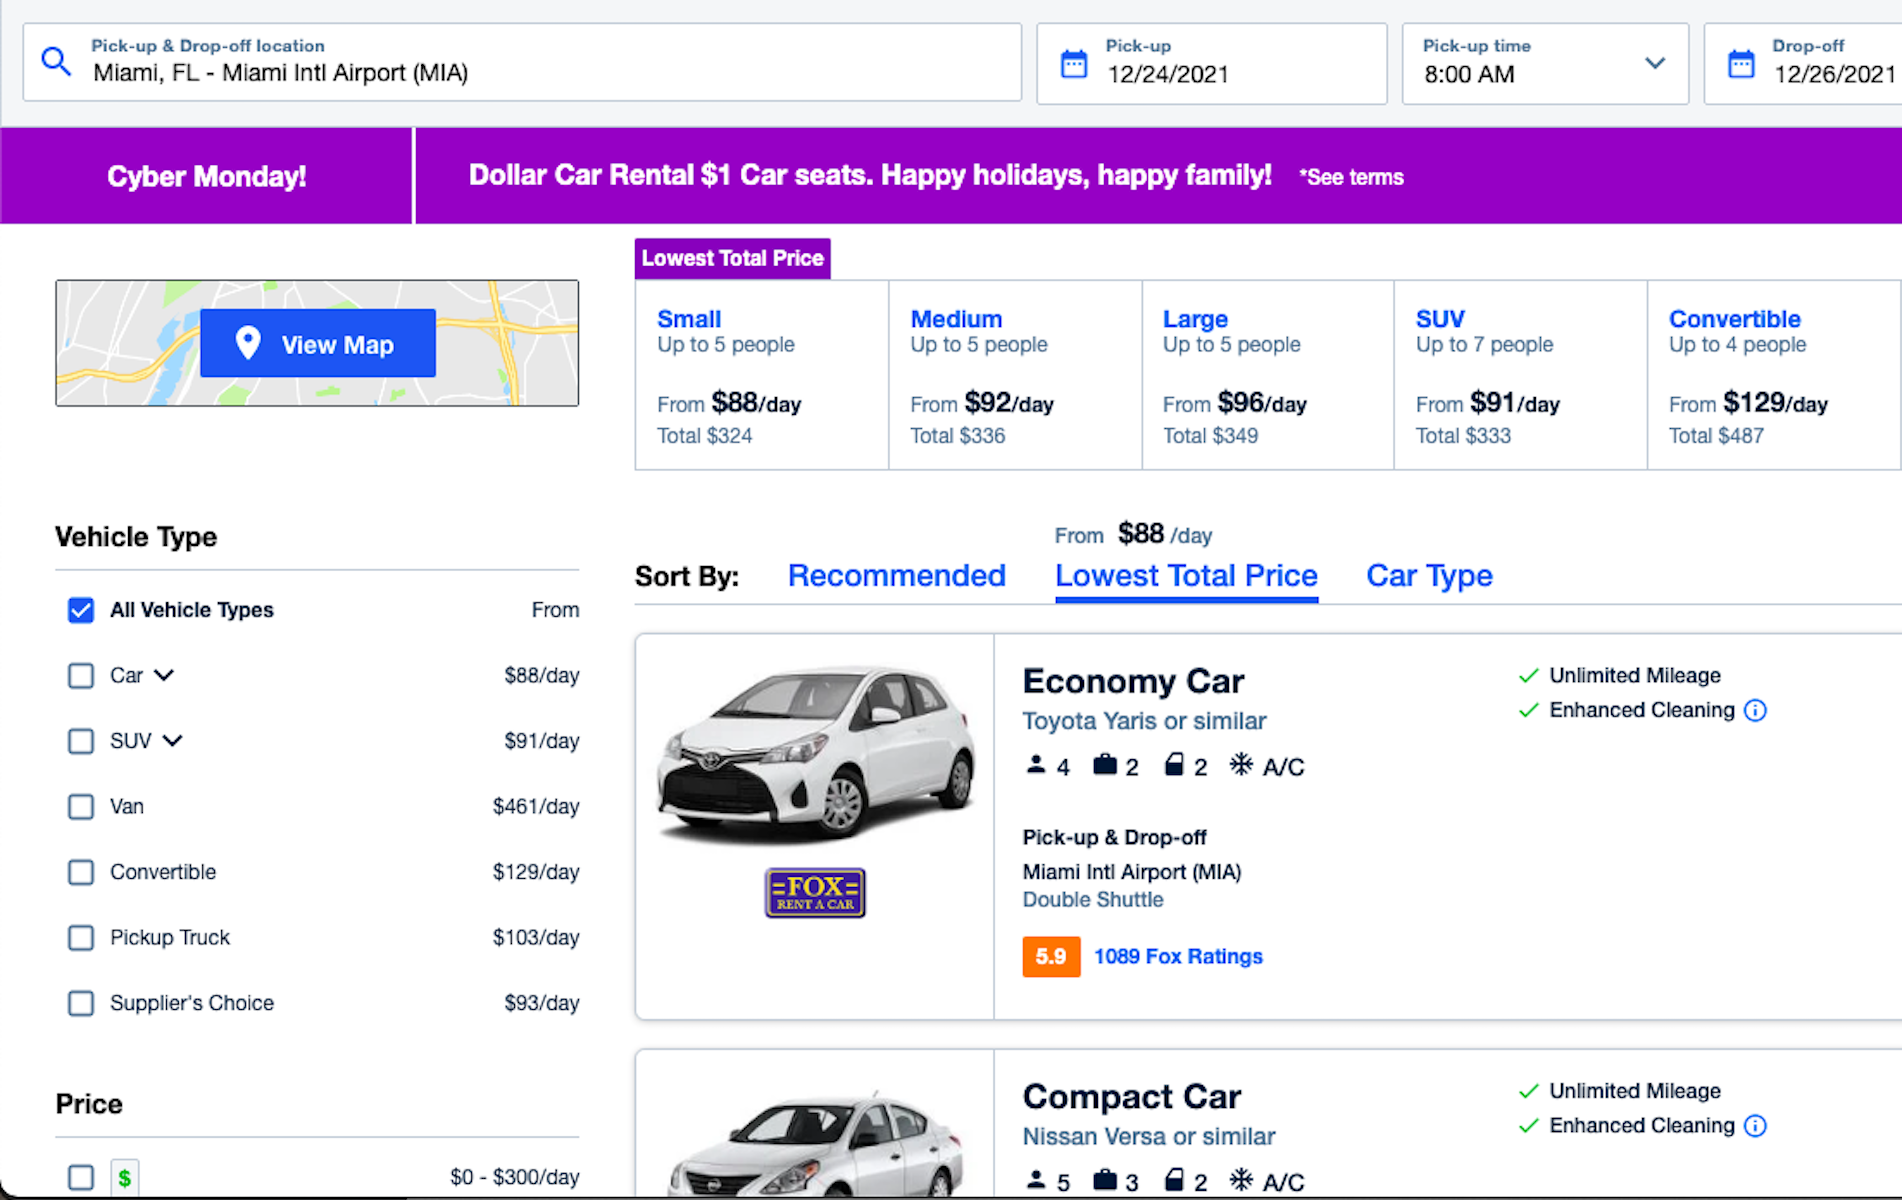 Pluses and Minuses of Using Capital One Travel for a Rental Car